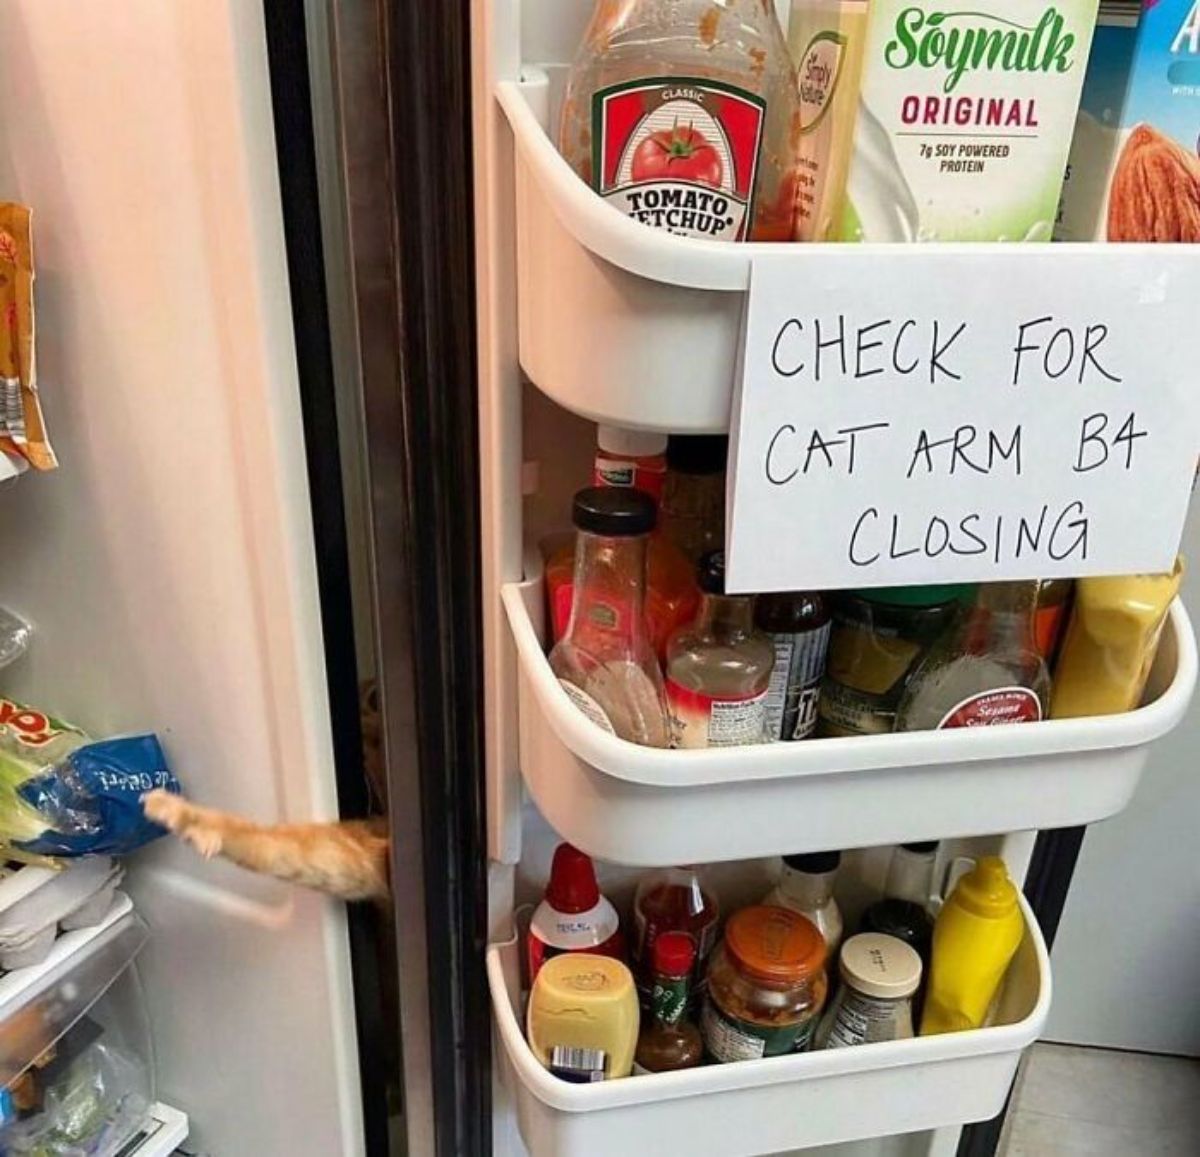 orange cat leg reaching into the fridge from the gap between the fridge door and the fridge with a sign saying check for cat arm b4 closing